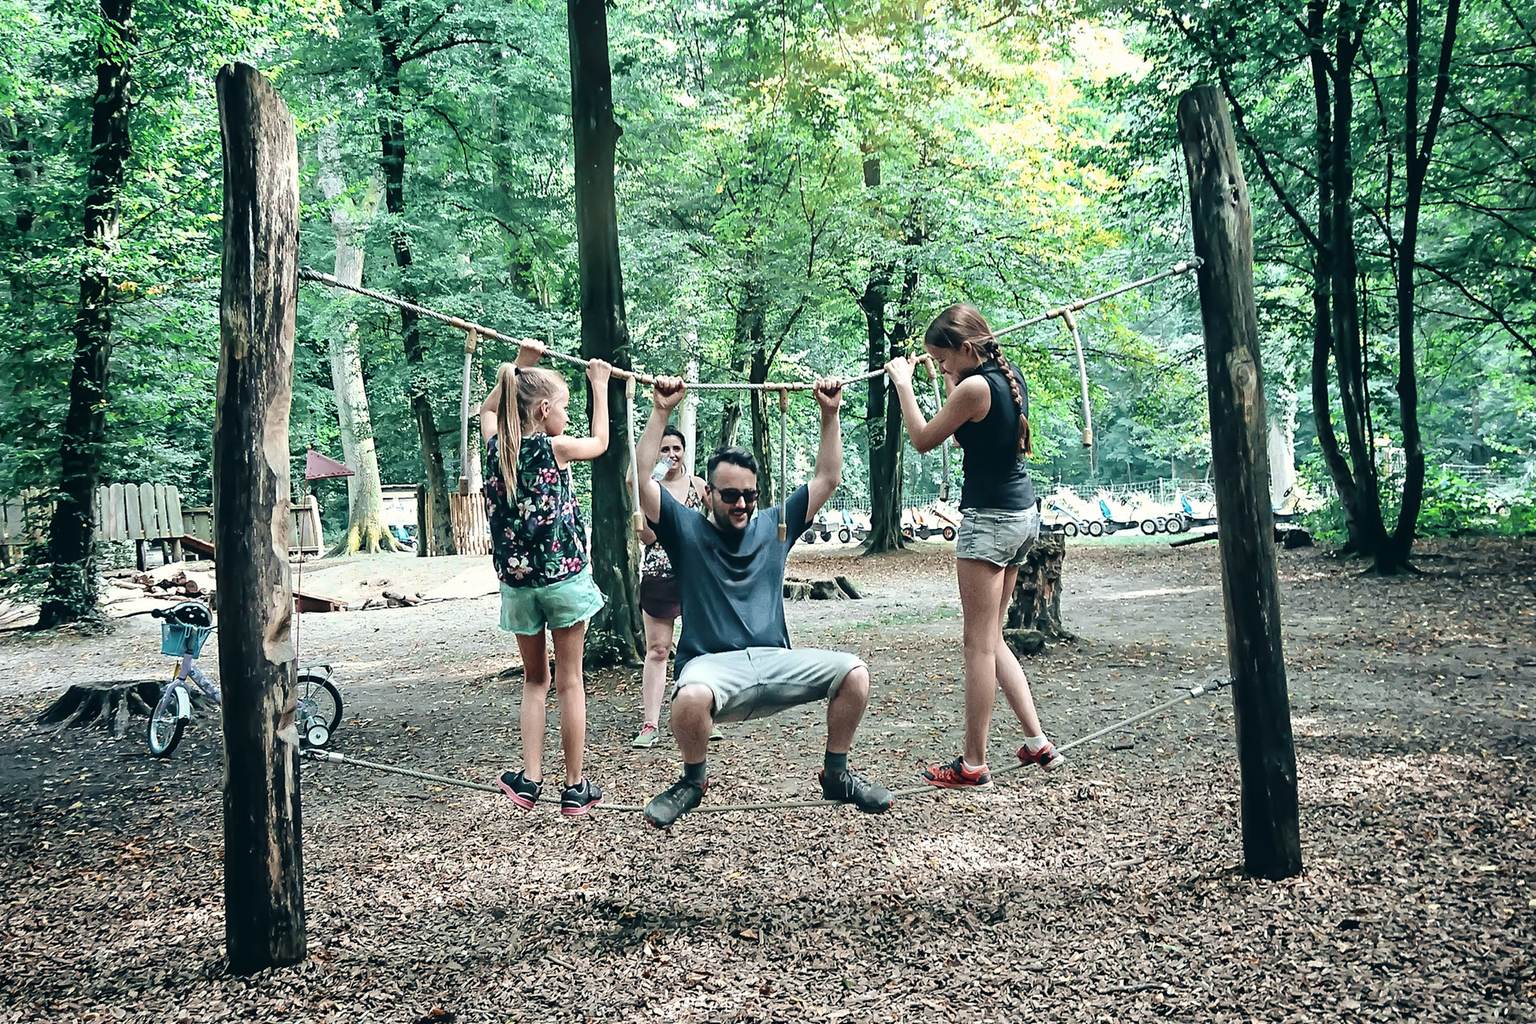 A father balances on a rope with his two daughters in an outdoor playground.